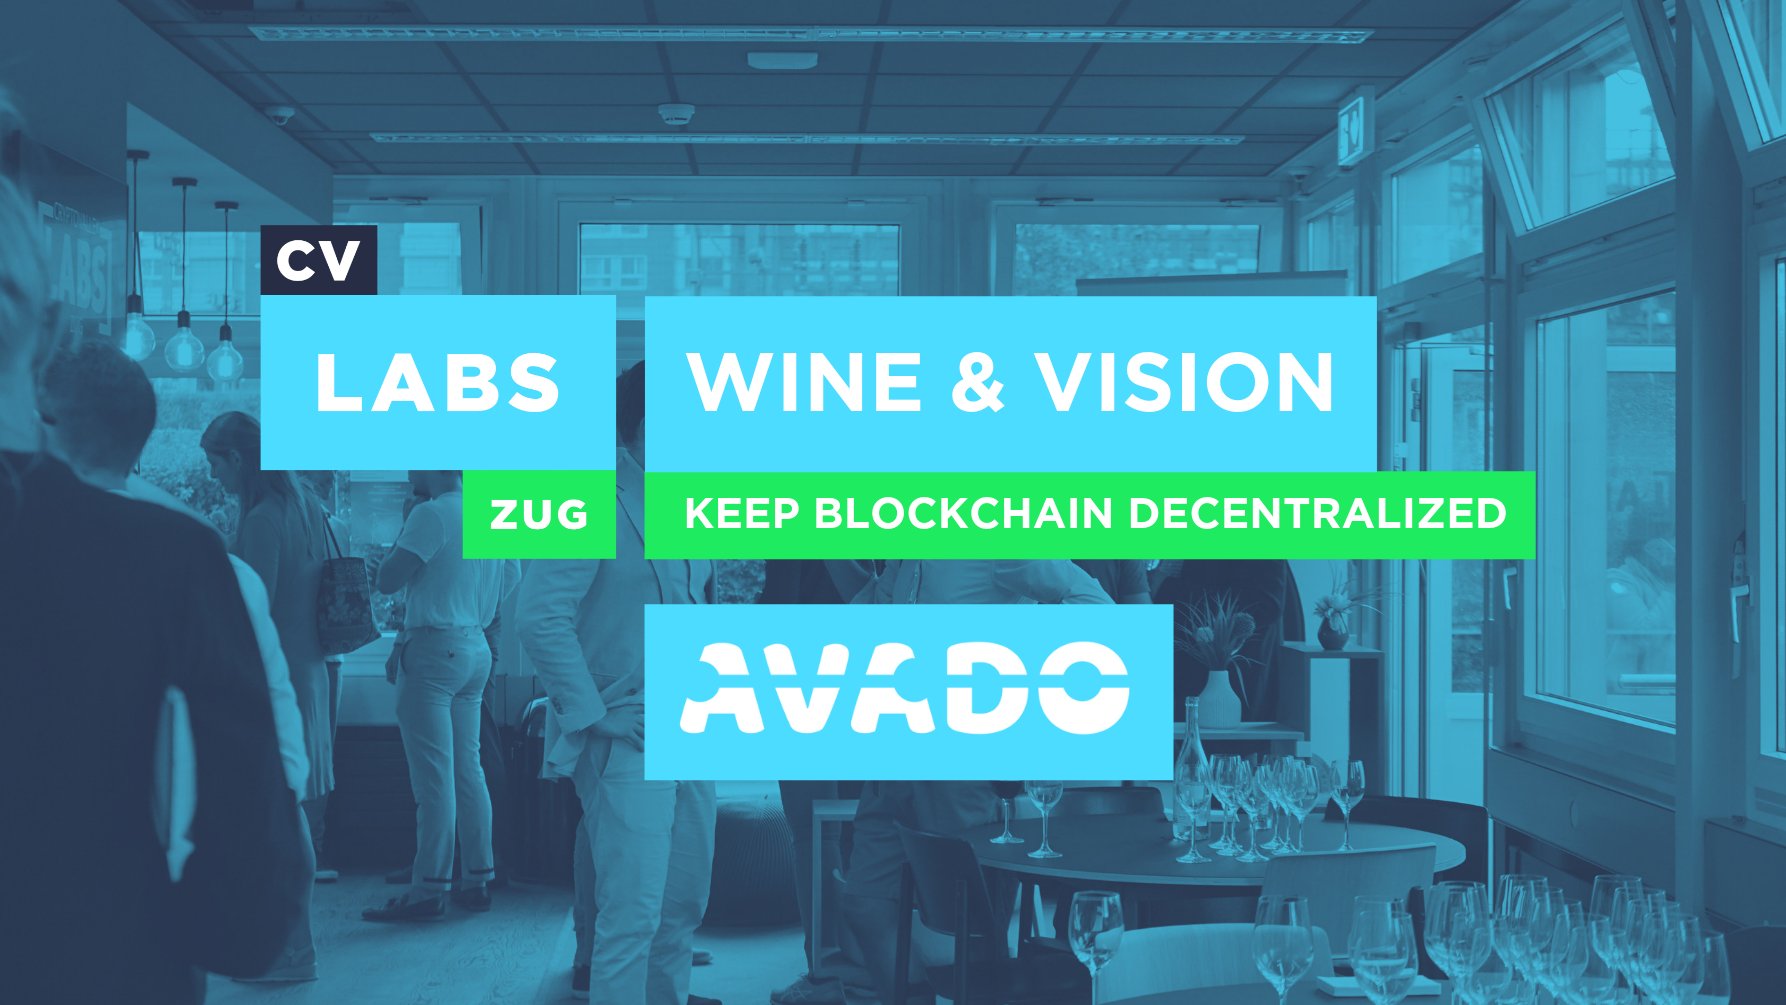 Wine & Vision: KEEP BLOCKCHAIN DECENTRALIZED supported by Avado am Freitag, 17. Mai